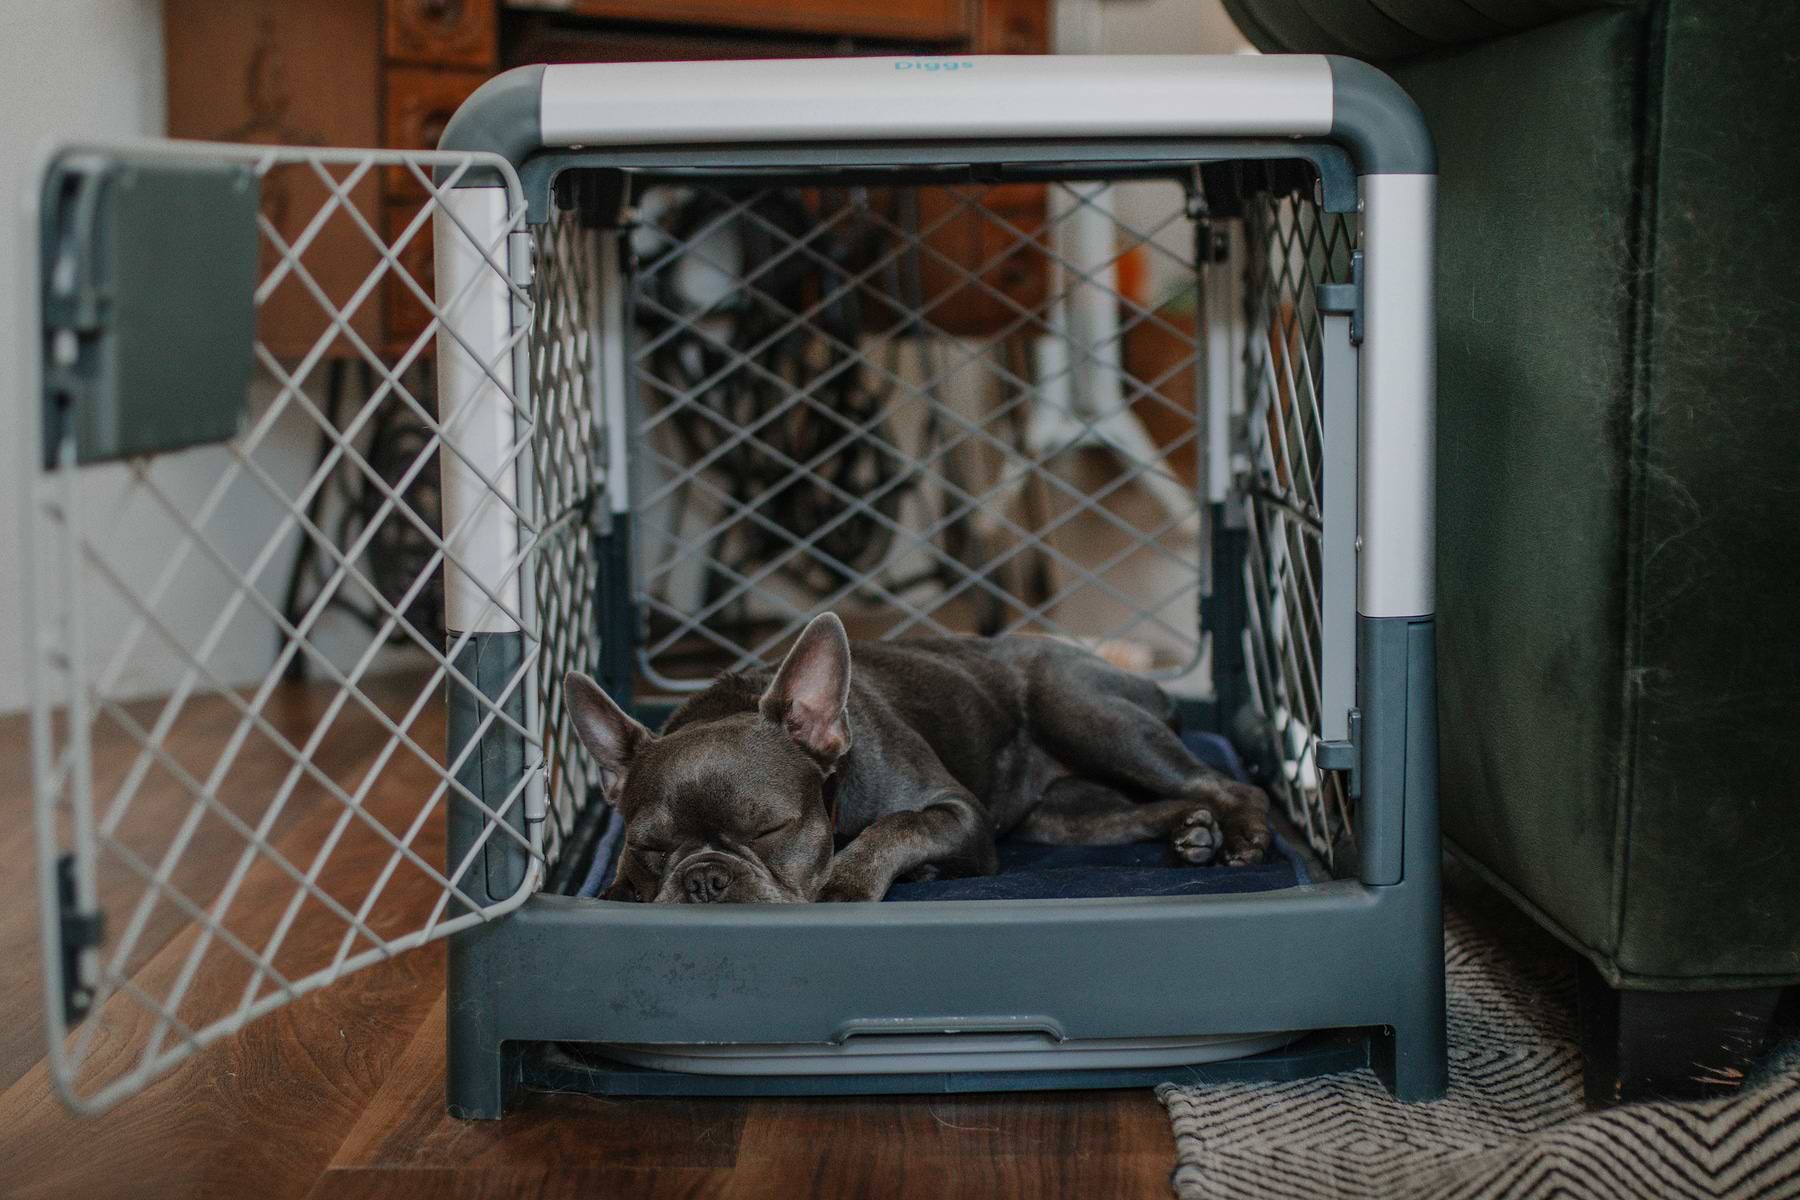 Dark brown Frenchie is asleep on a blue Snooz dog crate pad that is inside a grey Revol dog crate. The Revol dog crate front door is open.